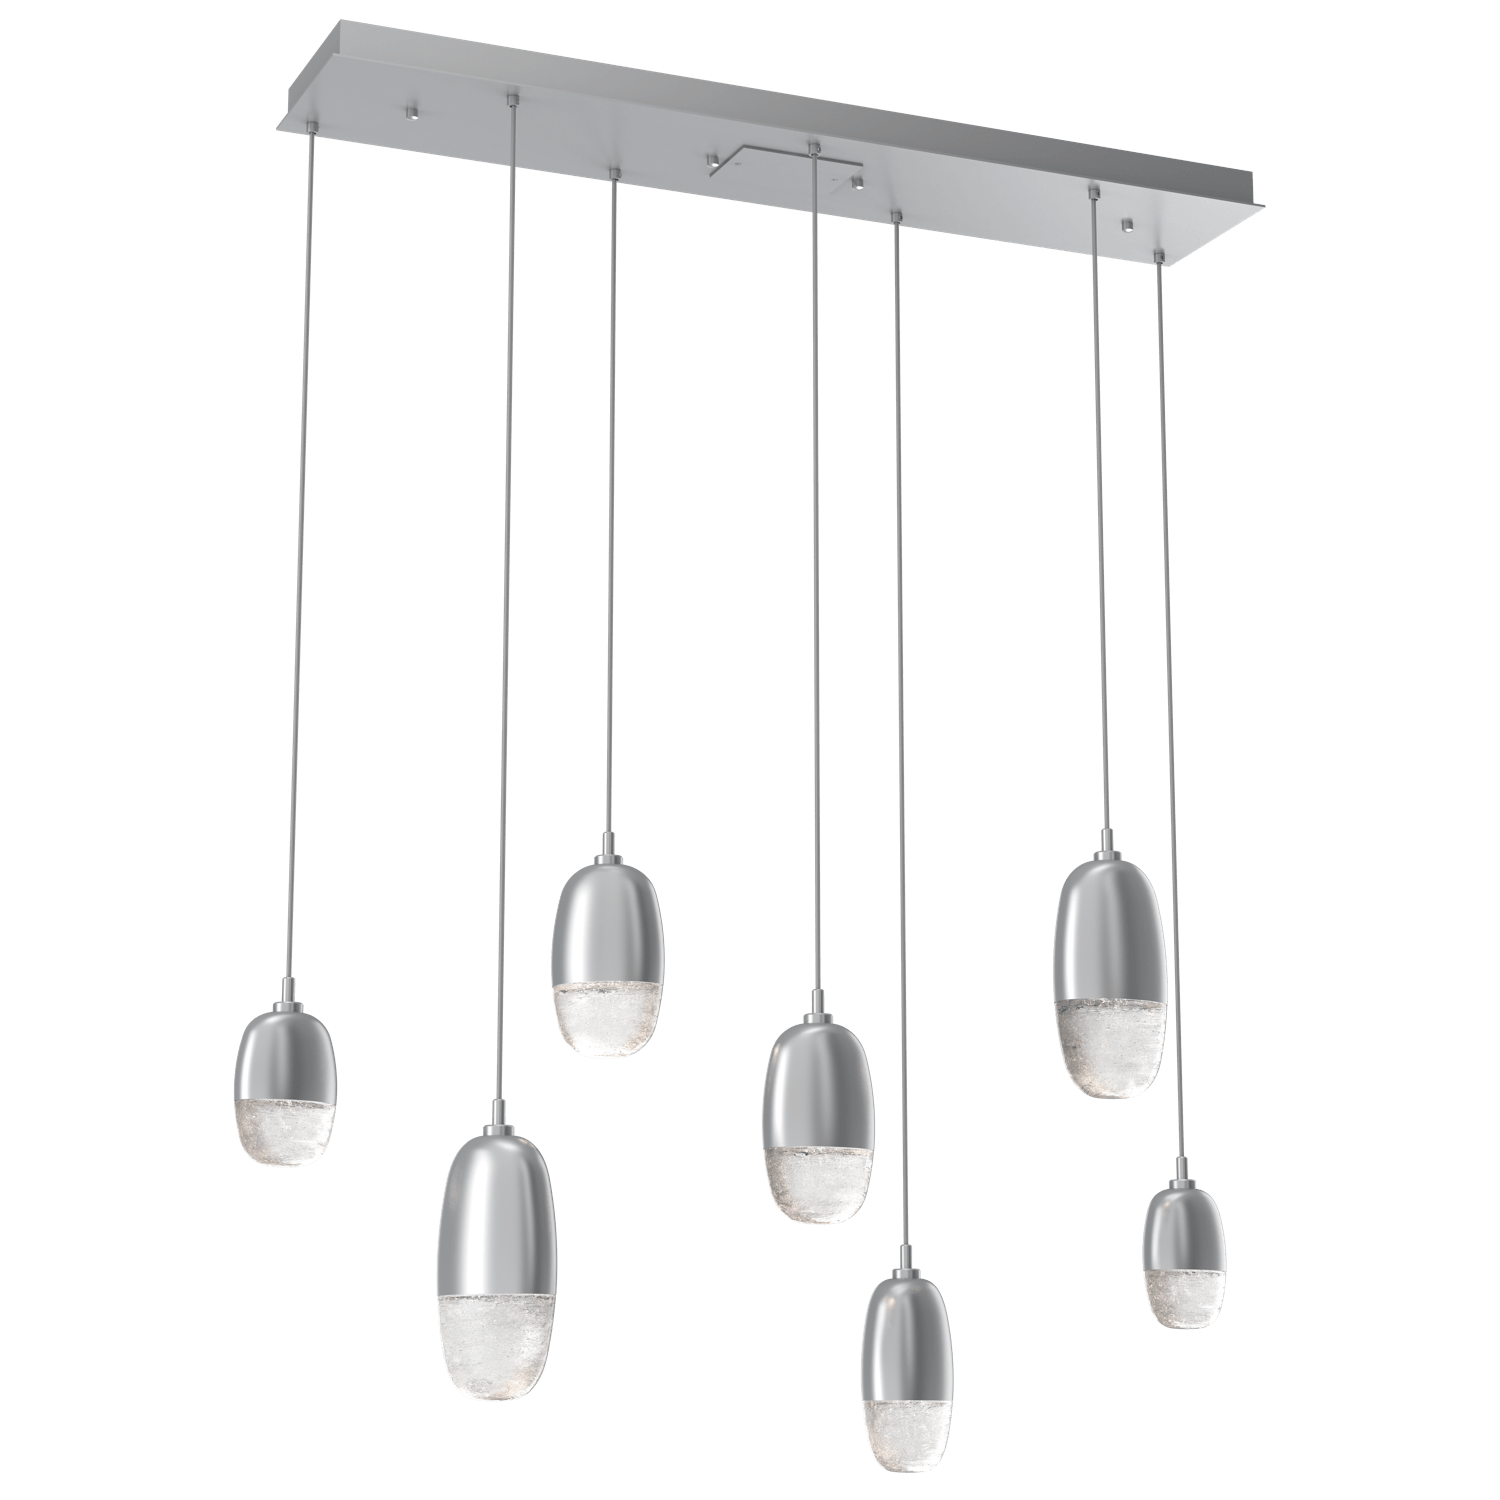 PLB0079-07-CS-Hammerton-Studio-Pebble-7-light-linear-pendant-chandelier-with-classic-silver-finish-and-clear-cast-glass-shades-and-LED-lamping